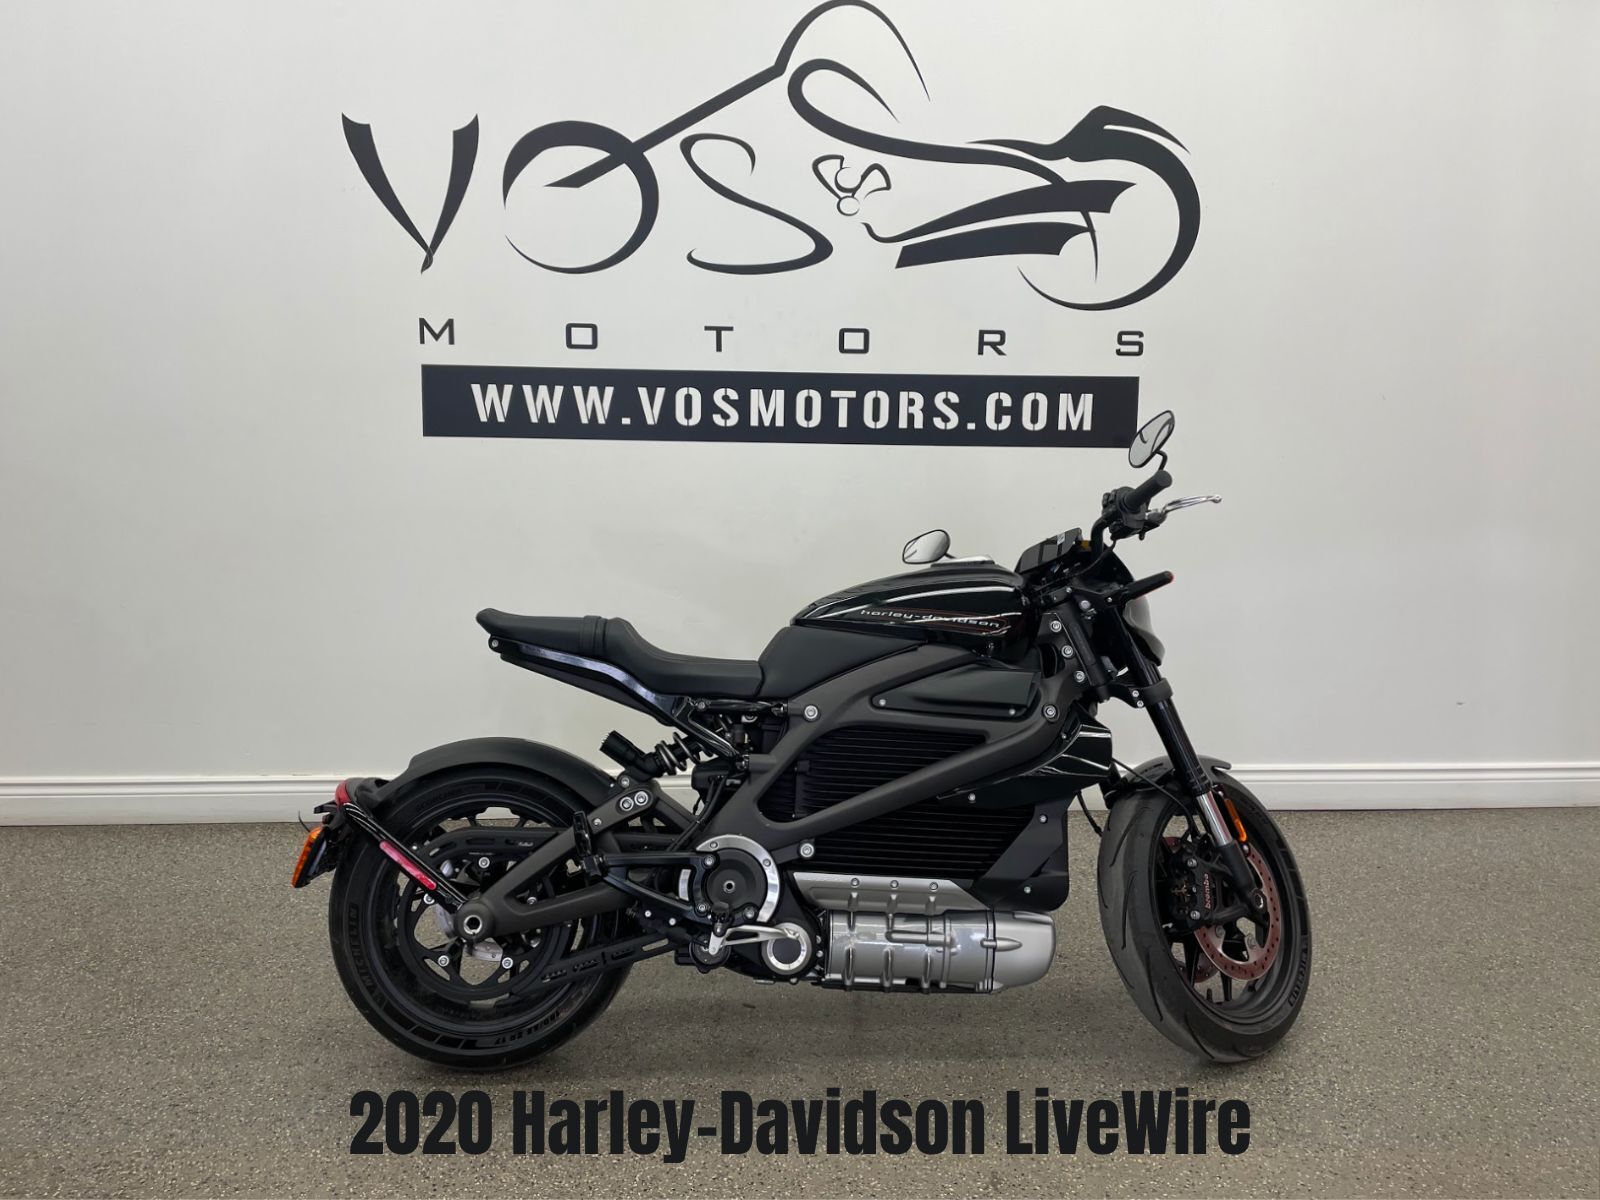 2020 Harley-Davidson LiveWire LiveWire ABS - V5035 - -No Payments for 1 Year**